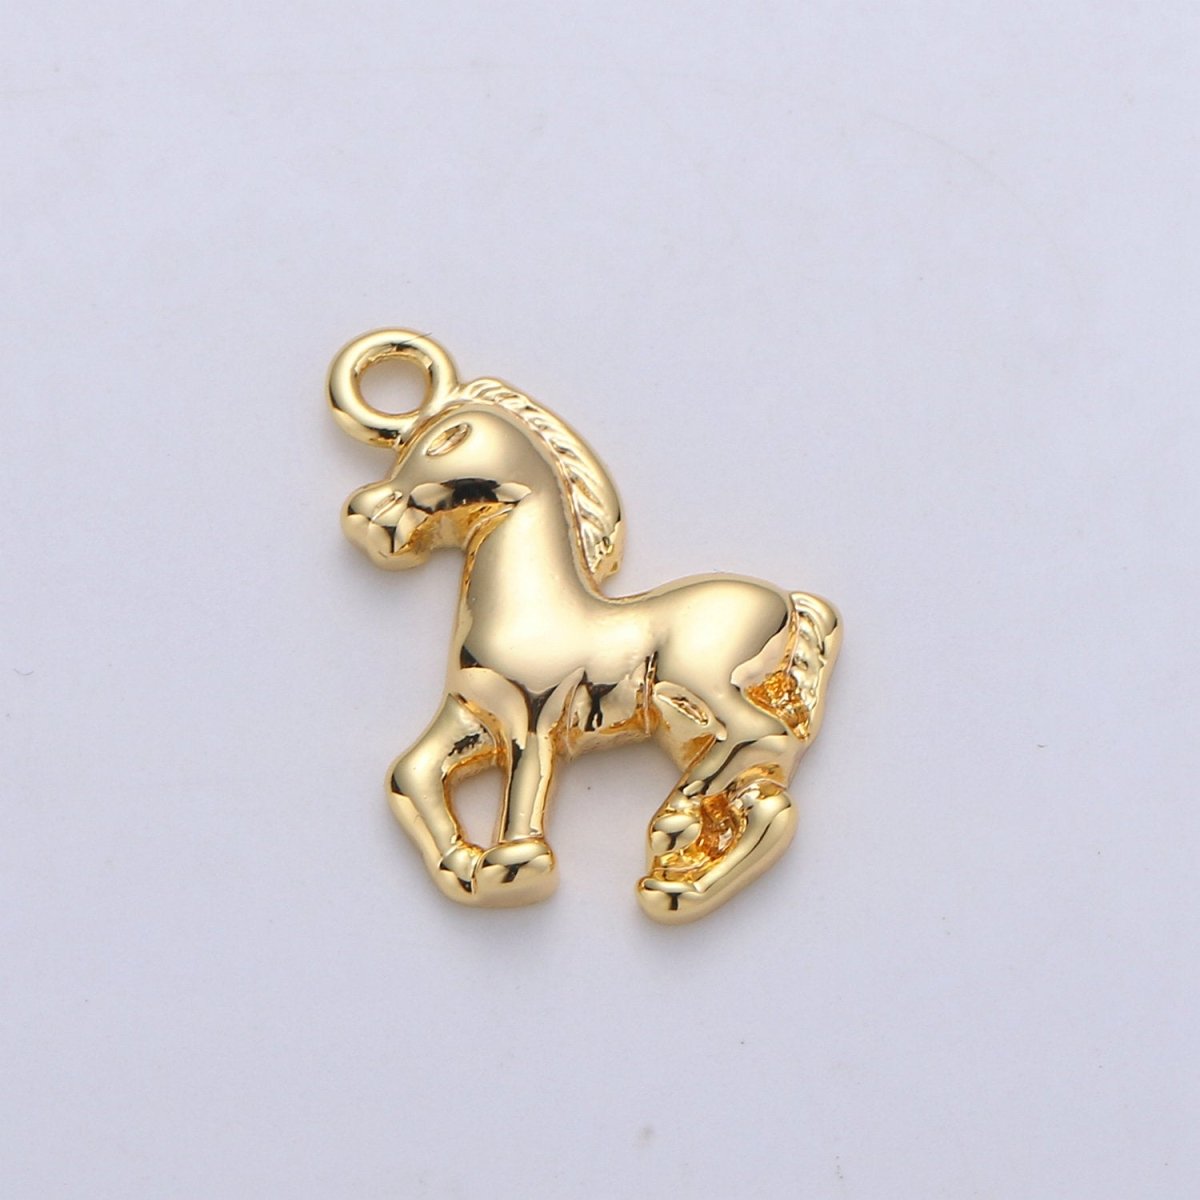 24K Gold Filled Stallion Horse Dainty Charm Beautiful Animal for Necklace or Bracelet C-892 - DLUXCA